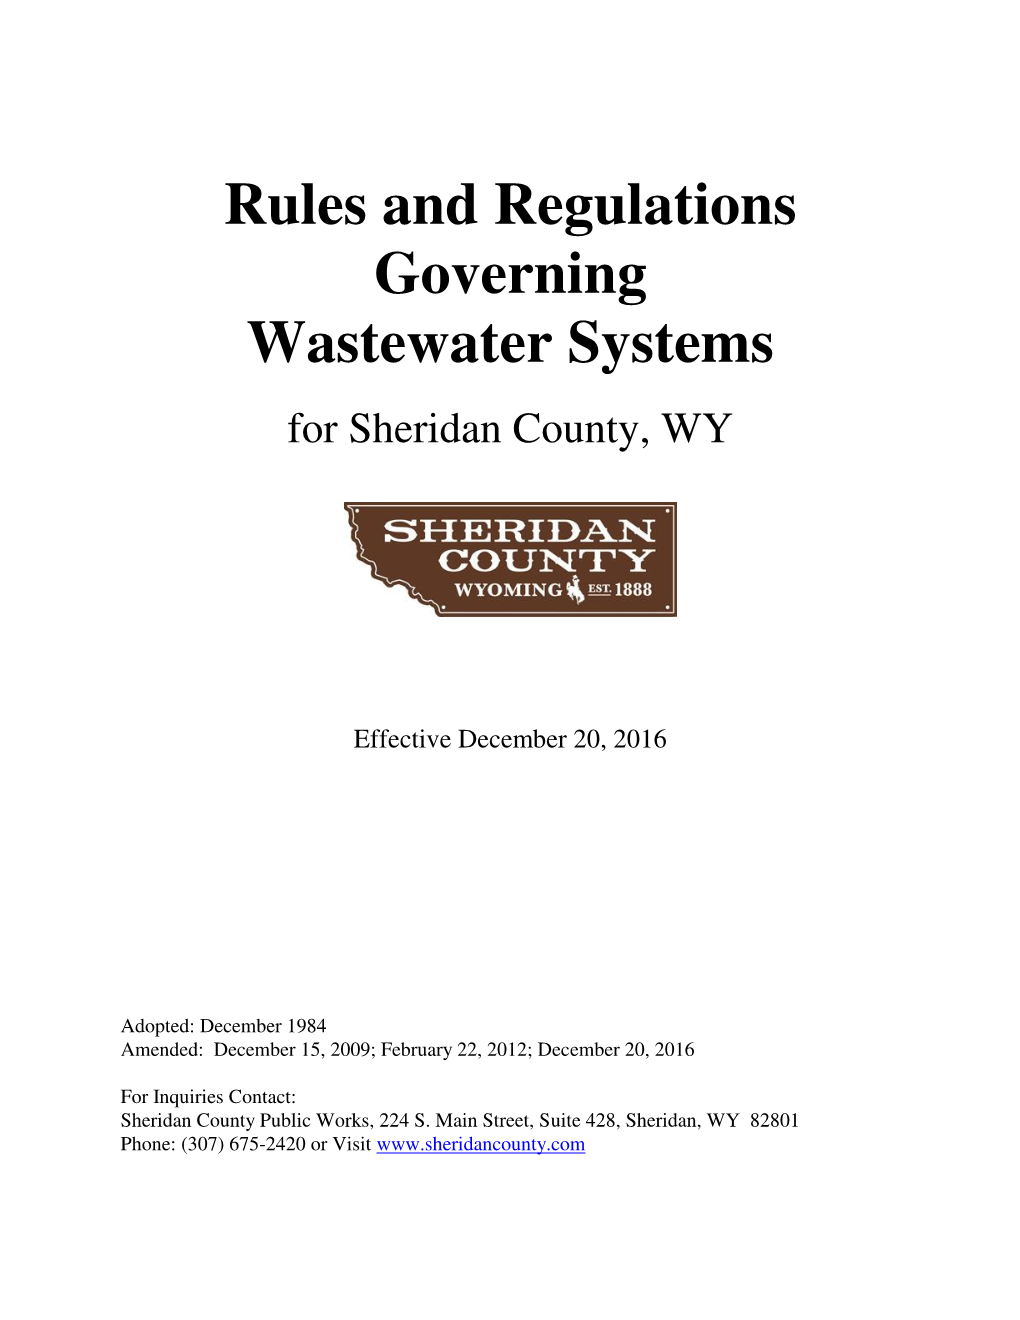 Rules and Regulations Governing Wastewater Systems